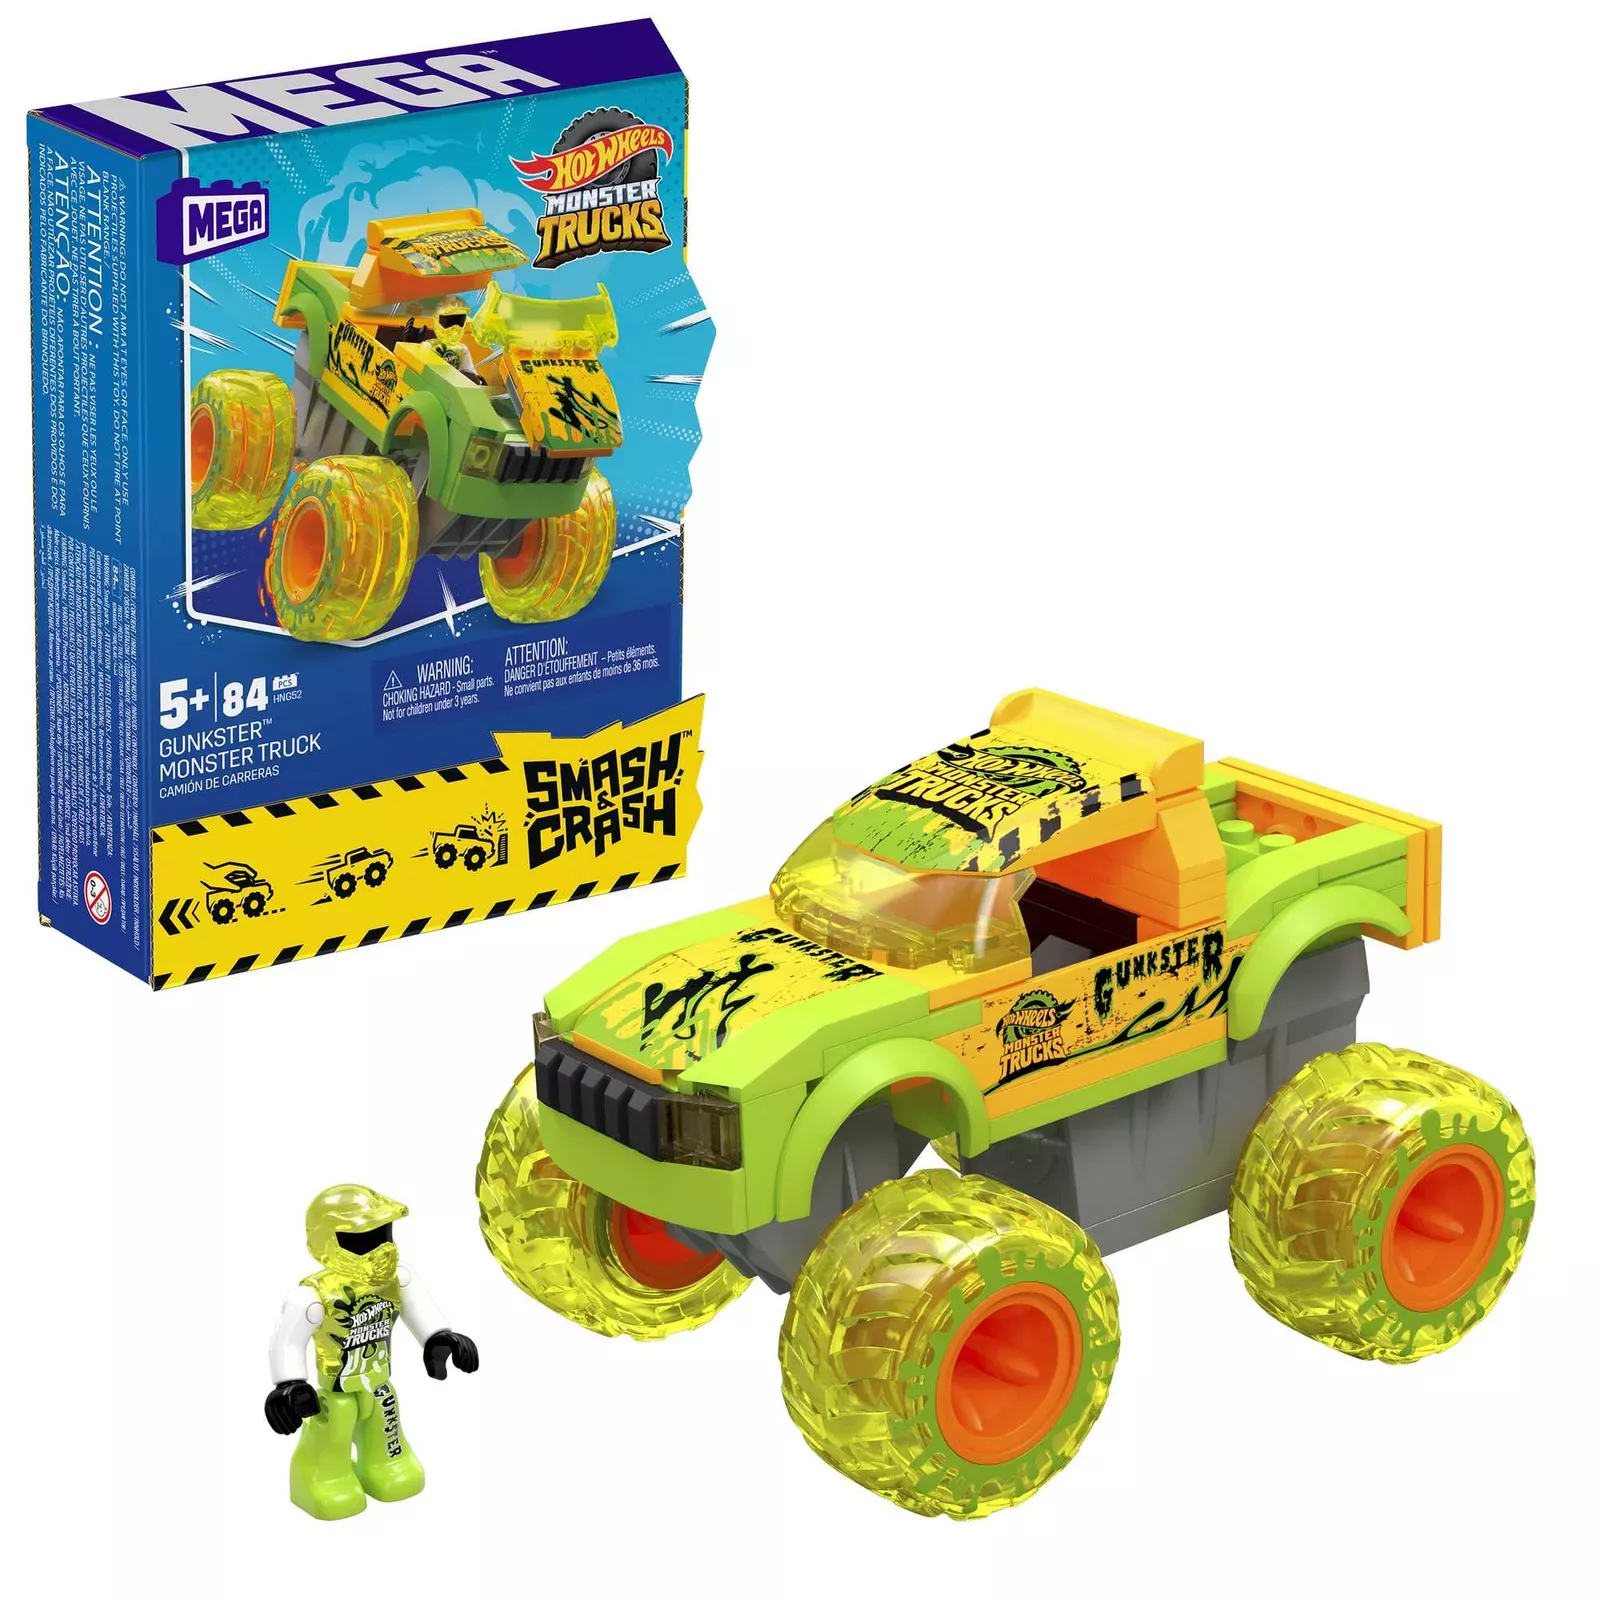 Hot Wheels Monster Trucks Hotweiler, Giant wheels, including connect and  crash car